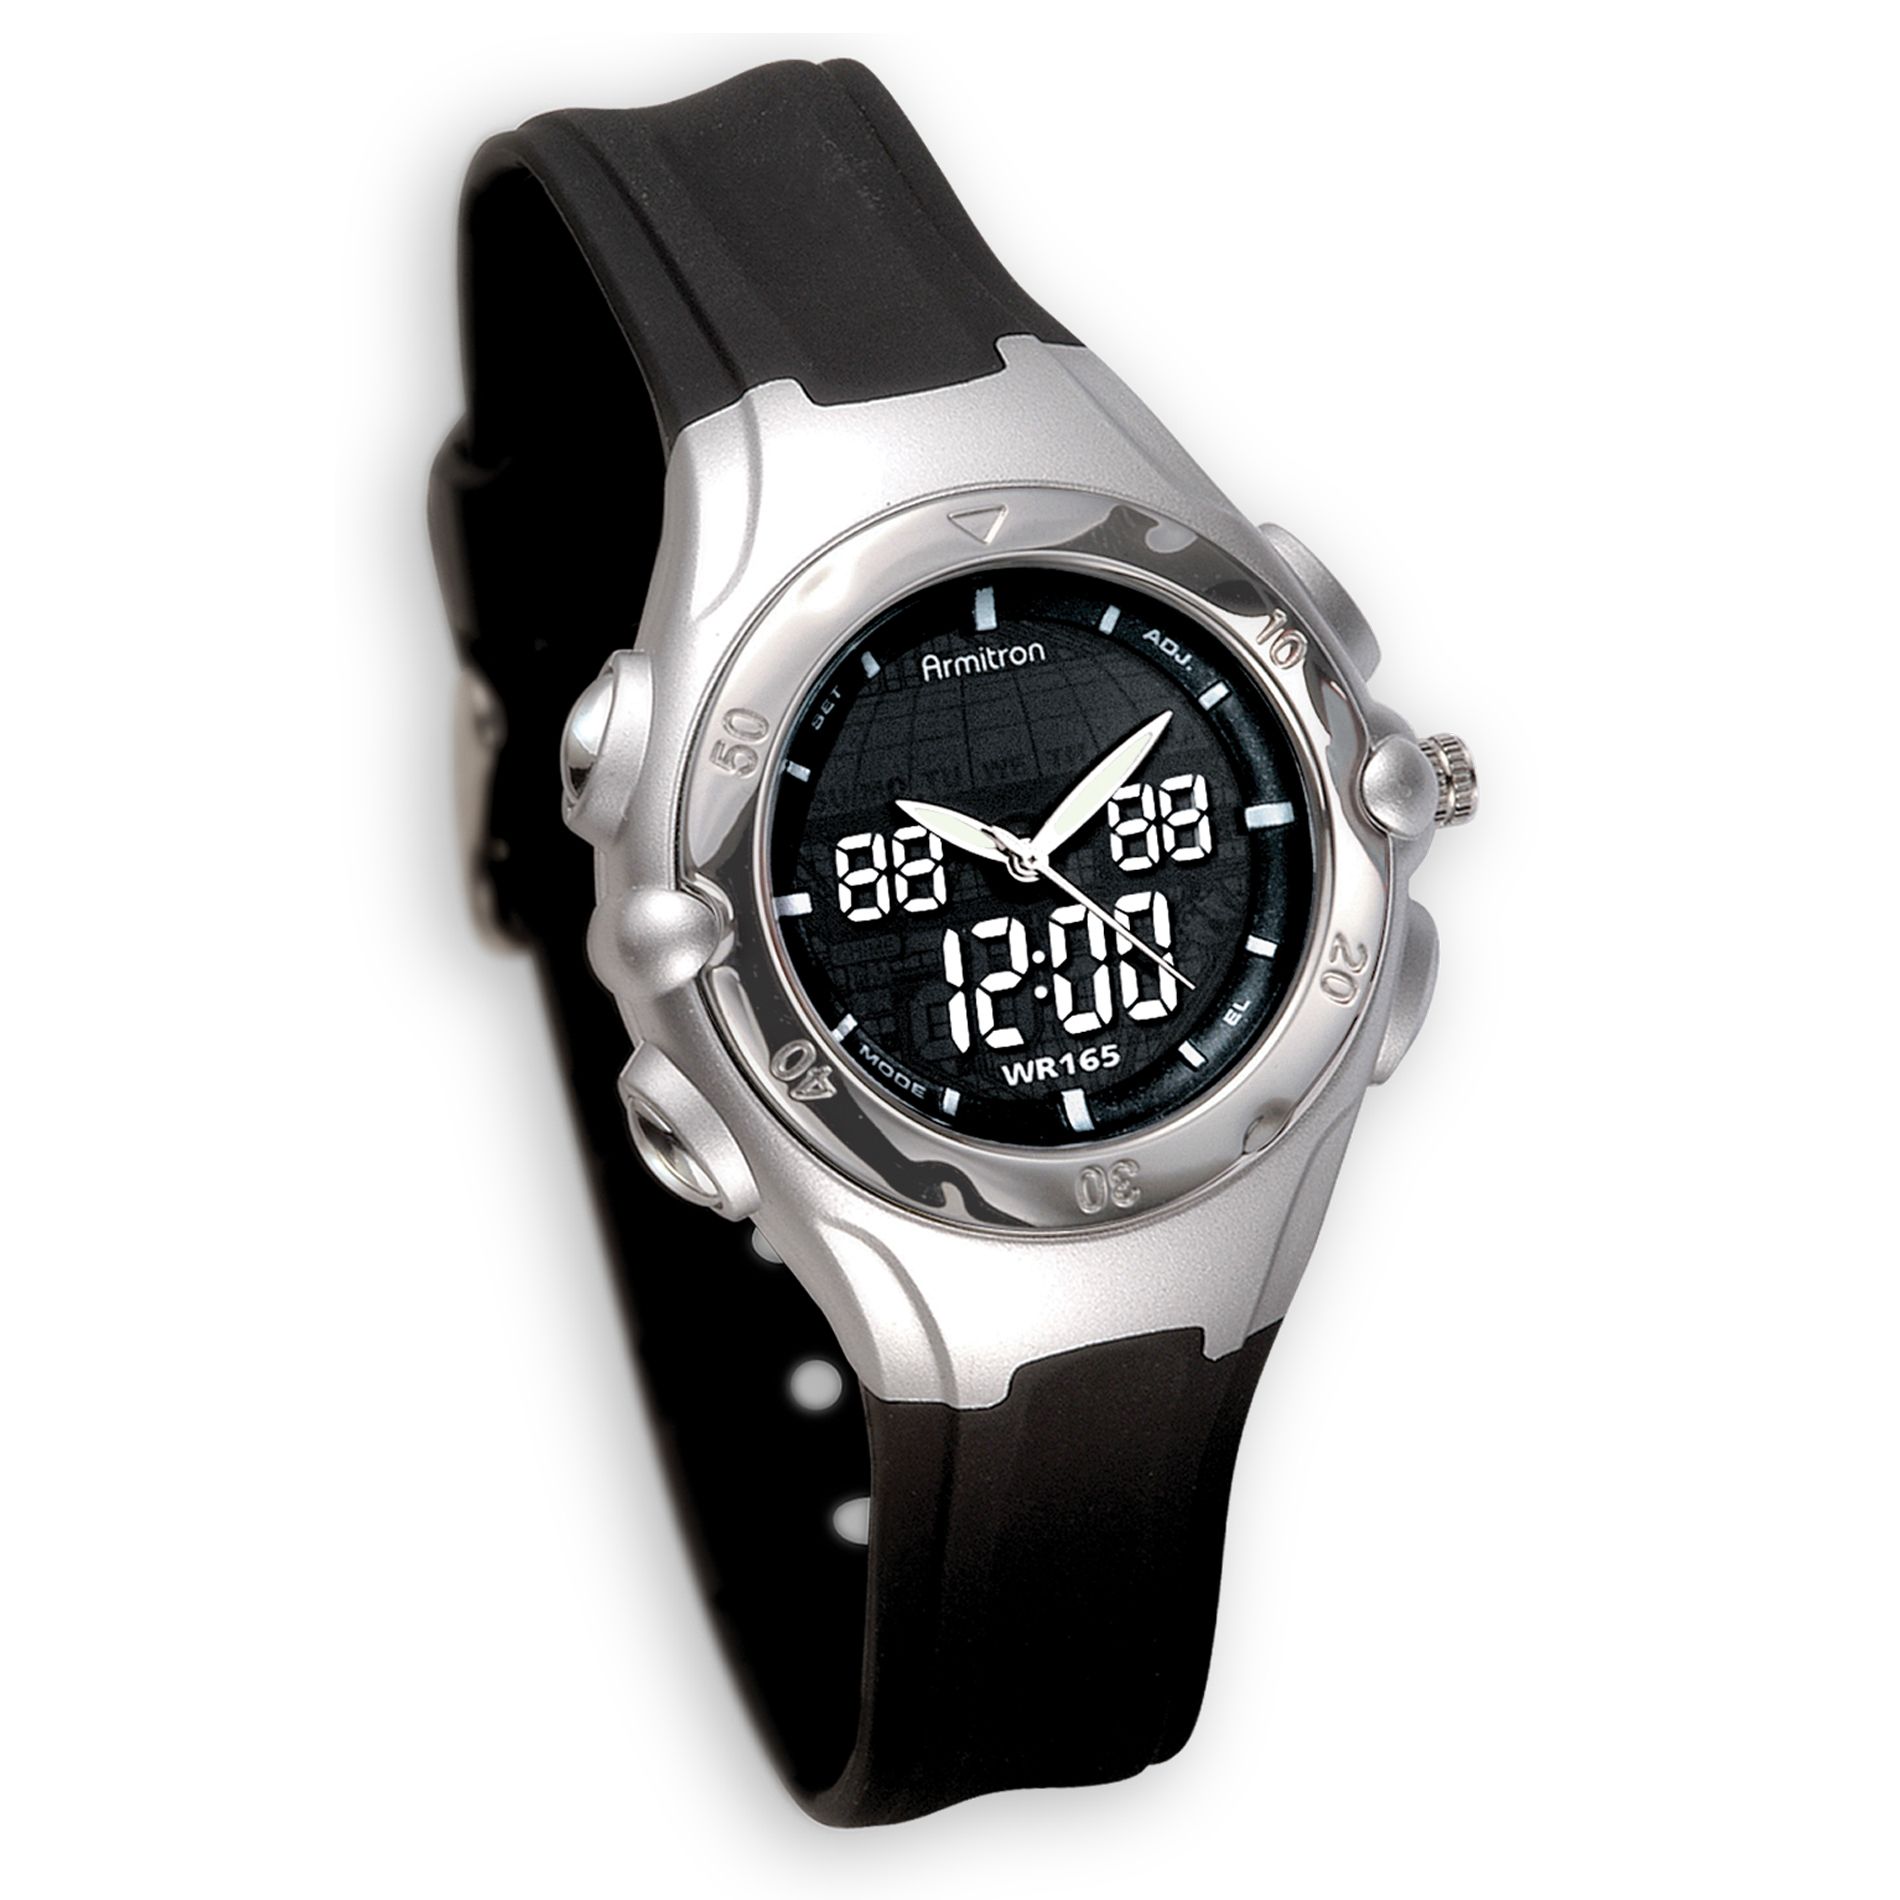 Mens Digital Calendar Date Watch with Black Dial and Black Resin Band